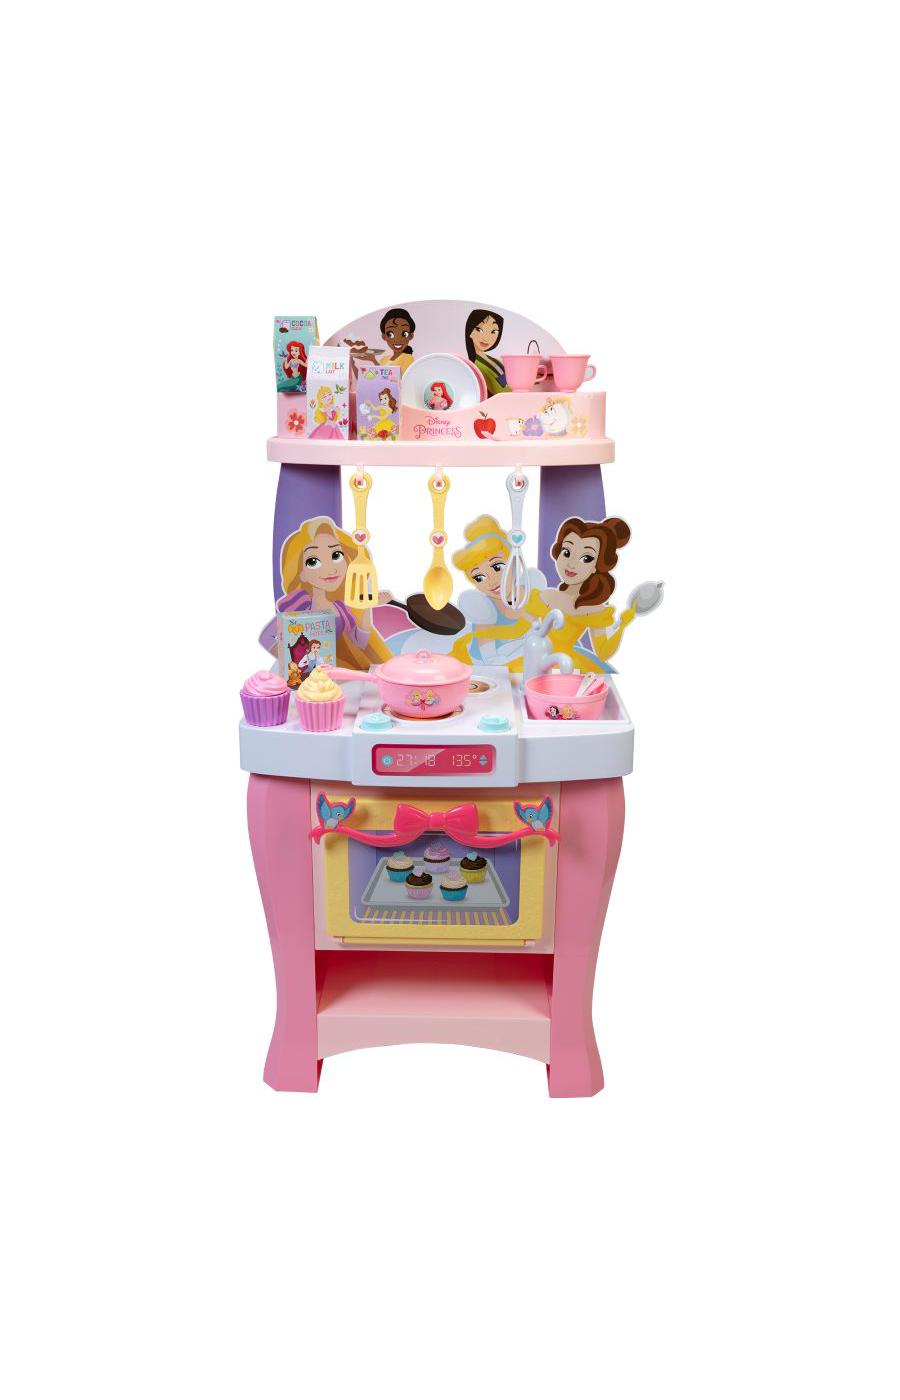 Disney Princess Kitchen Play set for Sale in Highland, CA - OfferUp